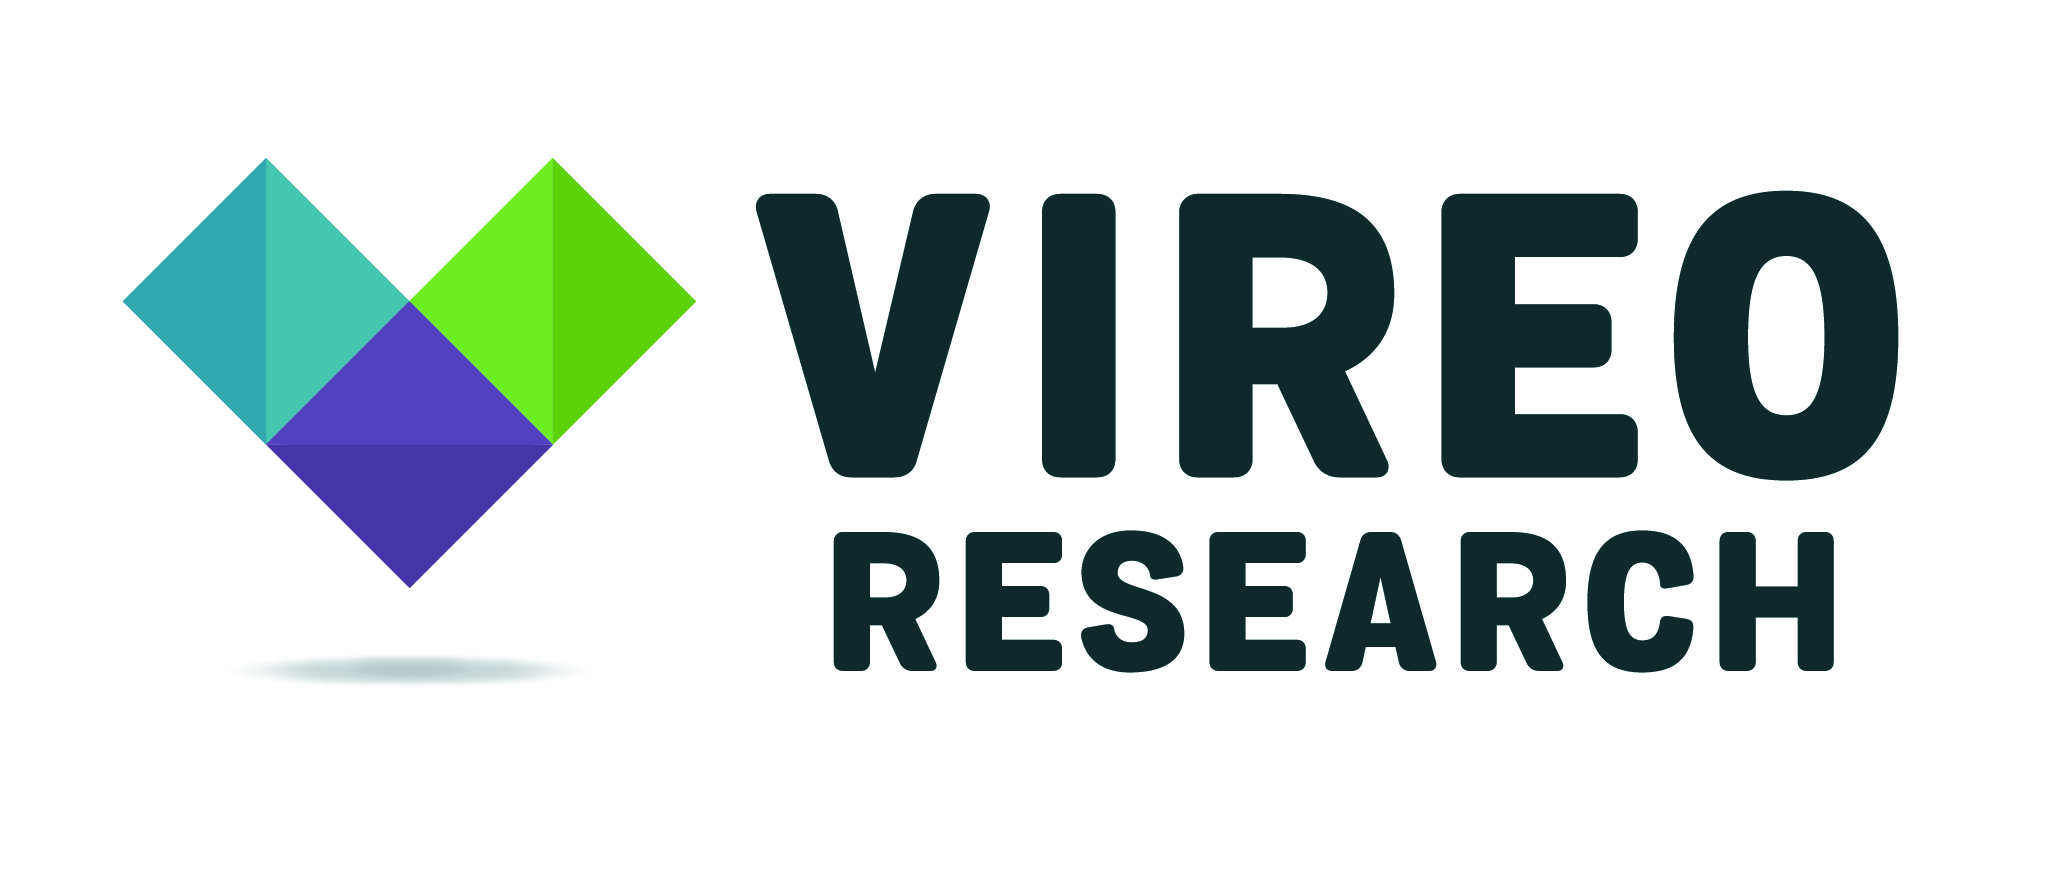 Vireo Research